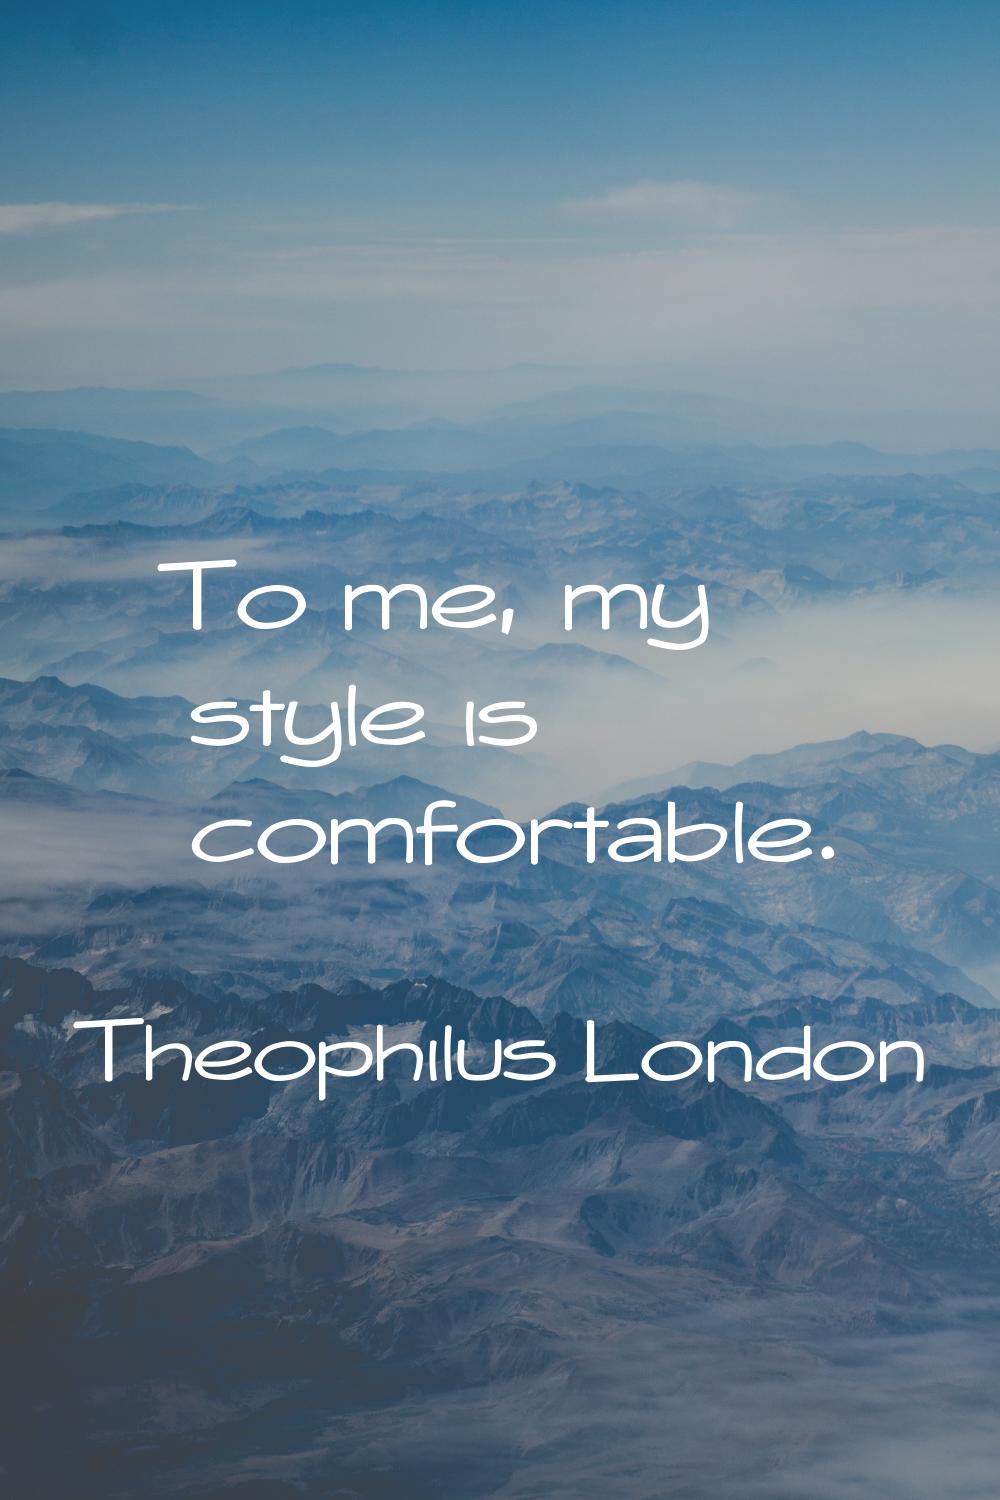 To me, my style is comfortable.